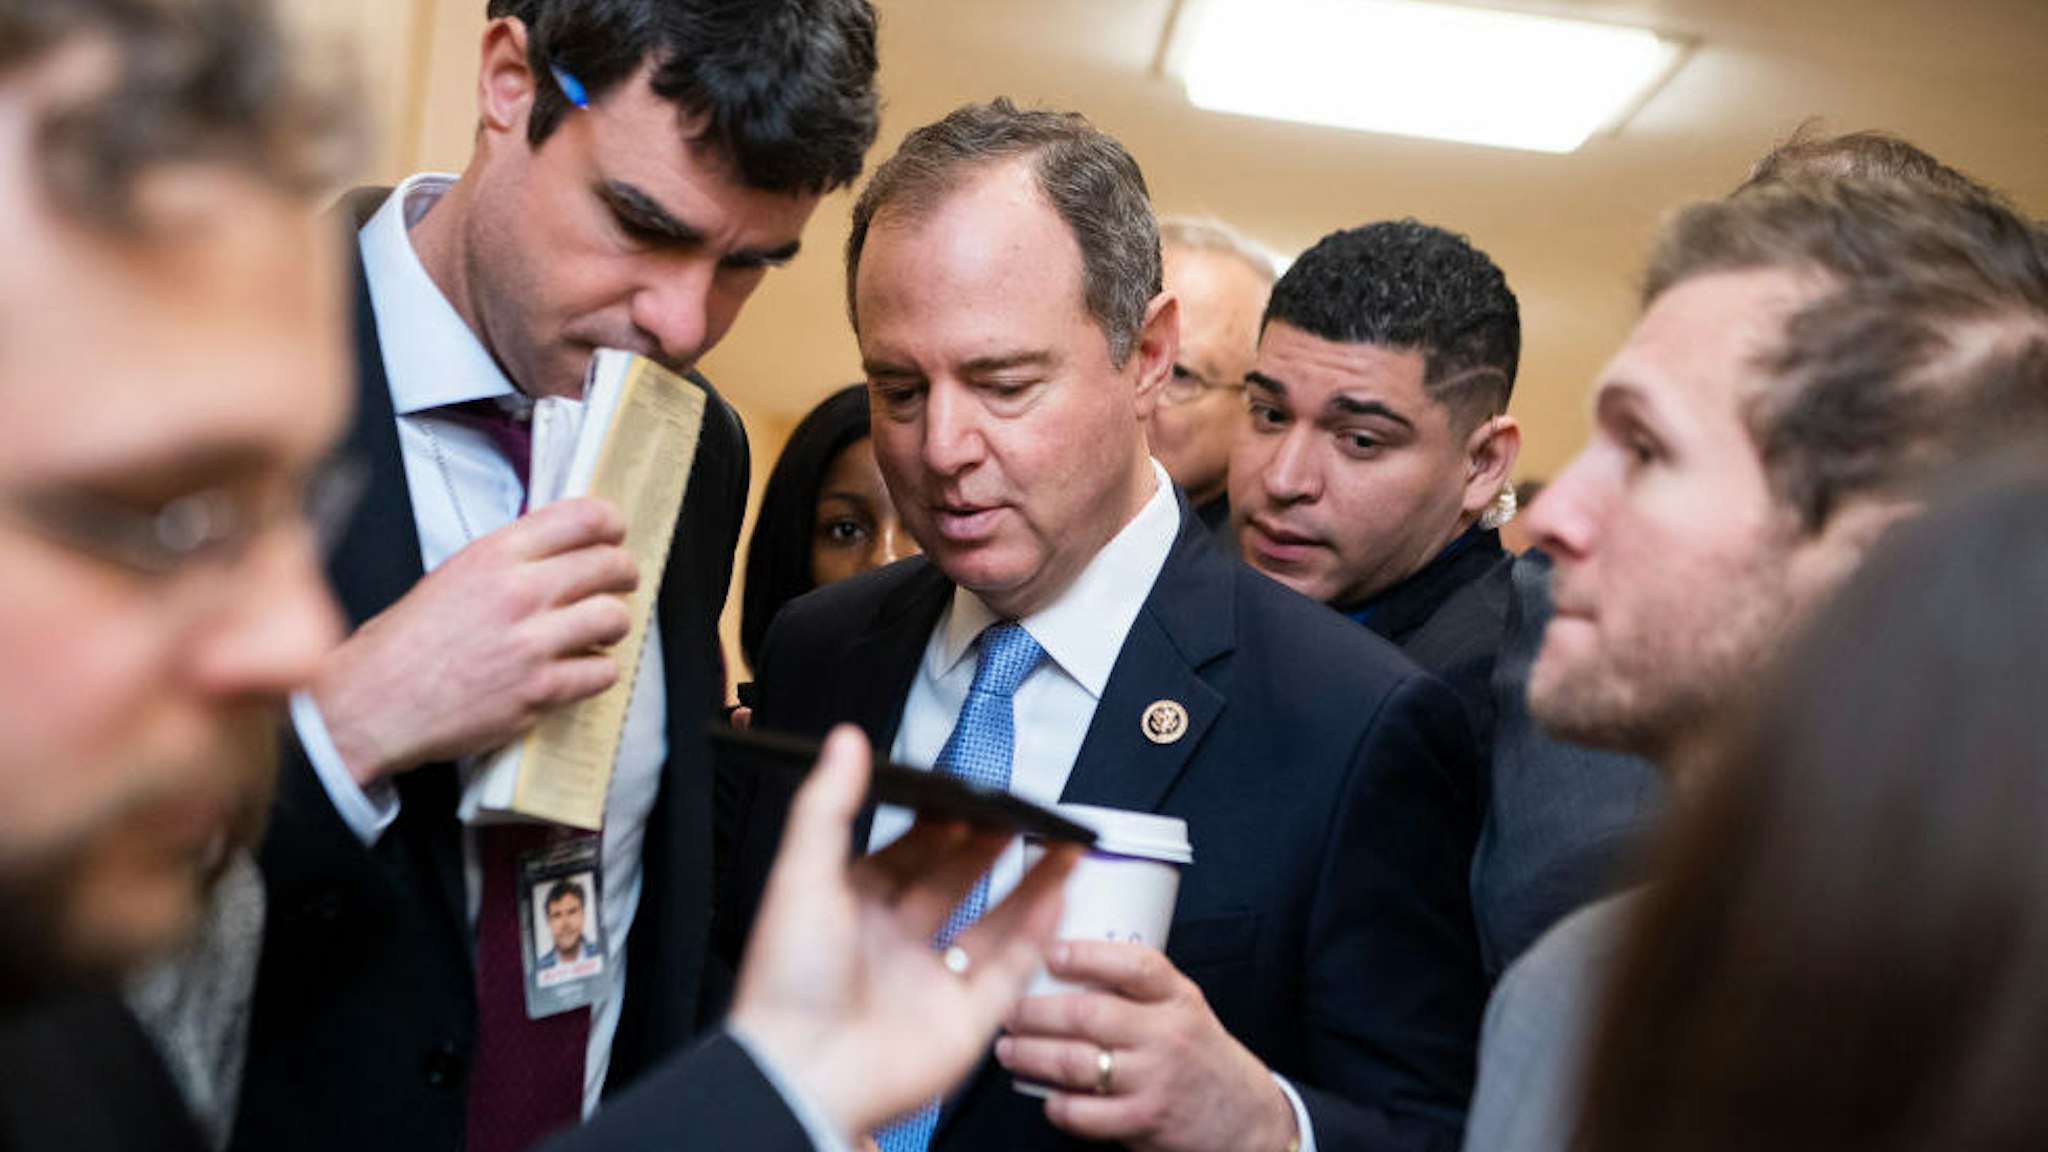 Rep. Adam Schiff, D-Calif., talks with reporters after a meeting of the House Democratic Caucus in the Capitol on Tuesday, March 3, 2020. (Photo By Tom Williams/CQ Roll Call)